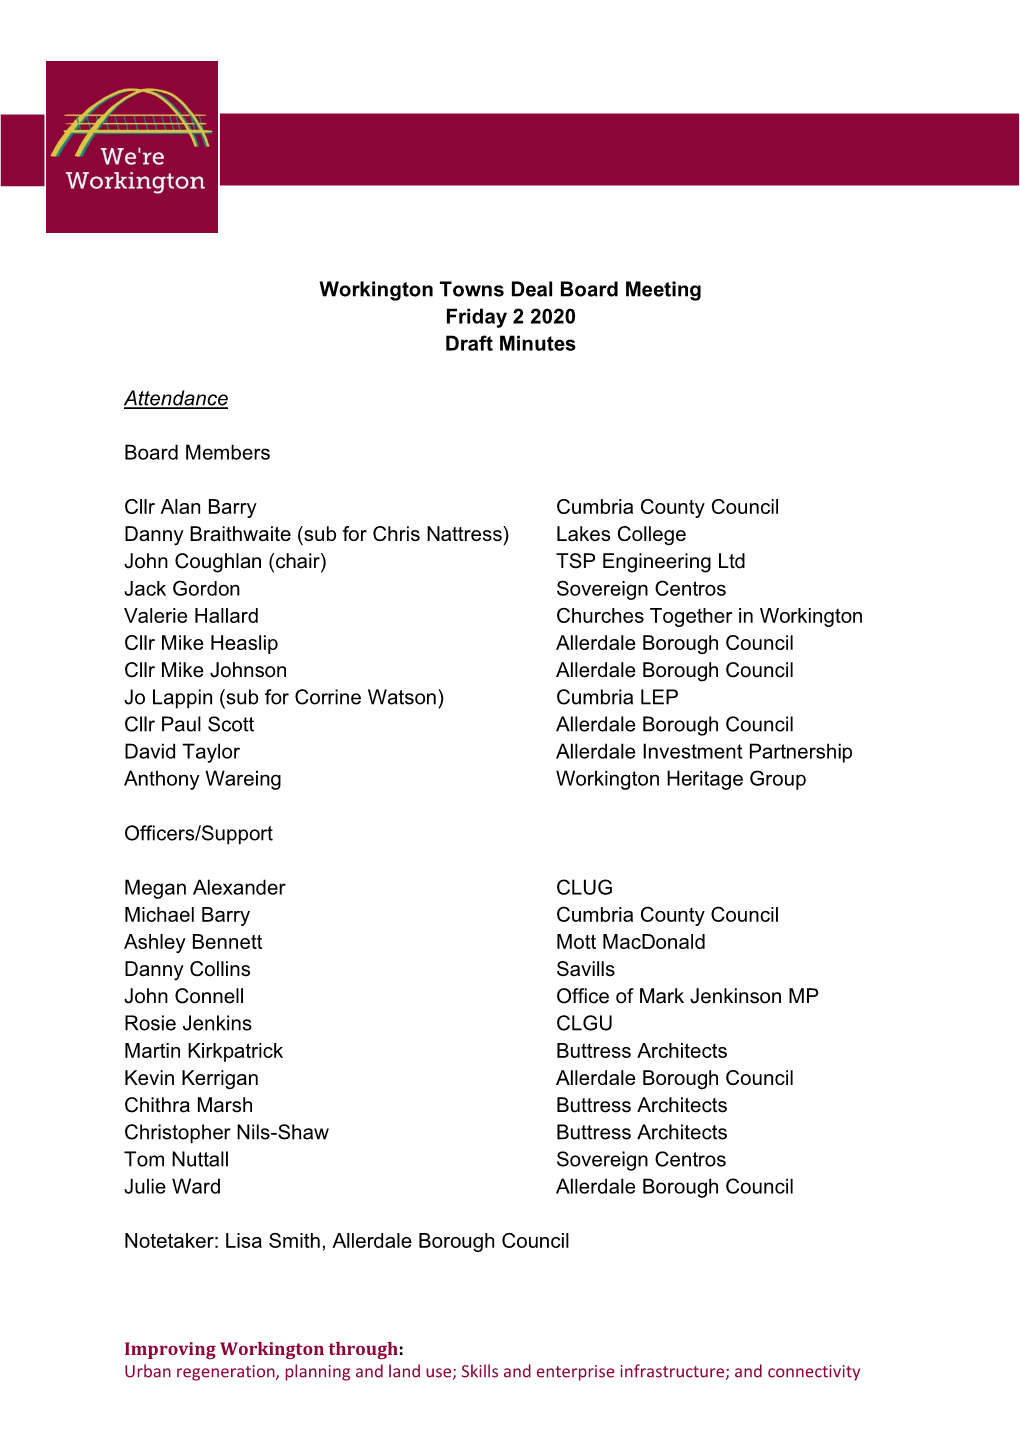 Workington Towns Deal Board Meeting Friday 2 2020 Draft Minutes